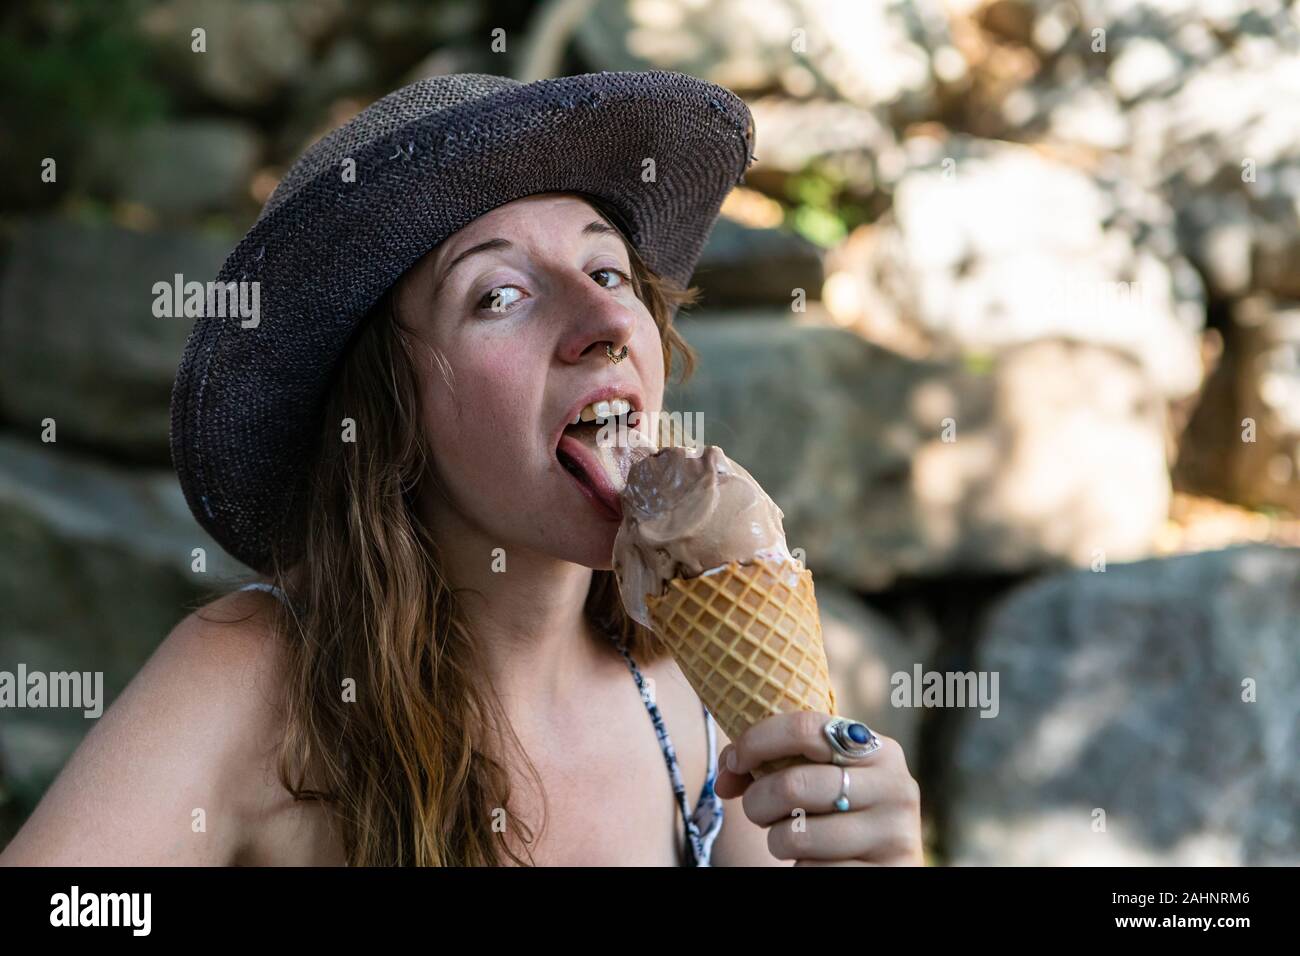 A close up and front portrait of a caucasian with pierced nose licking an ice cream cone. sitting in the shade near some blurry rocks Stock Photo